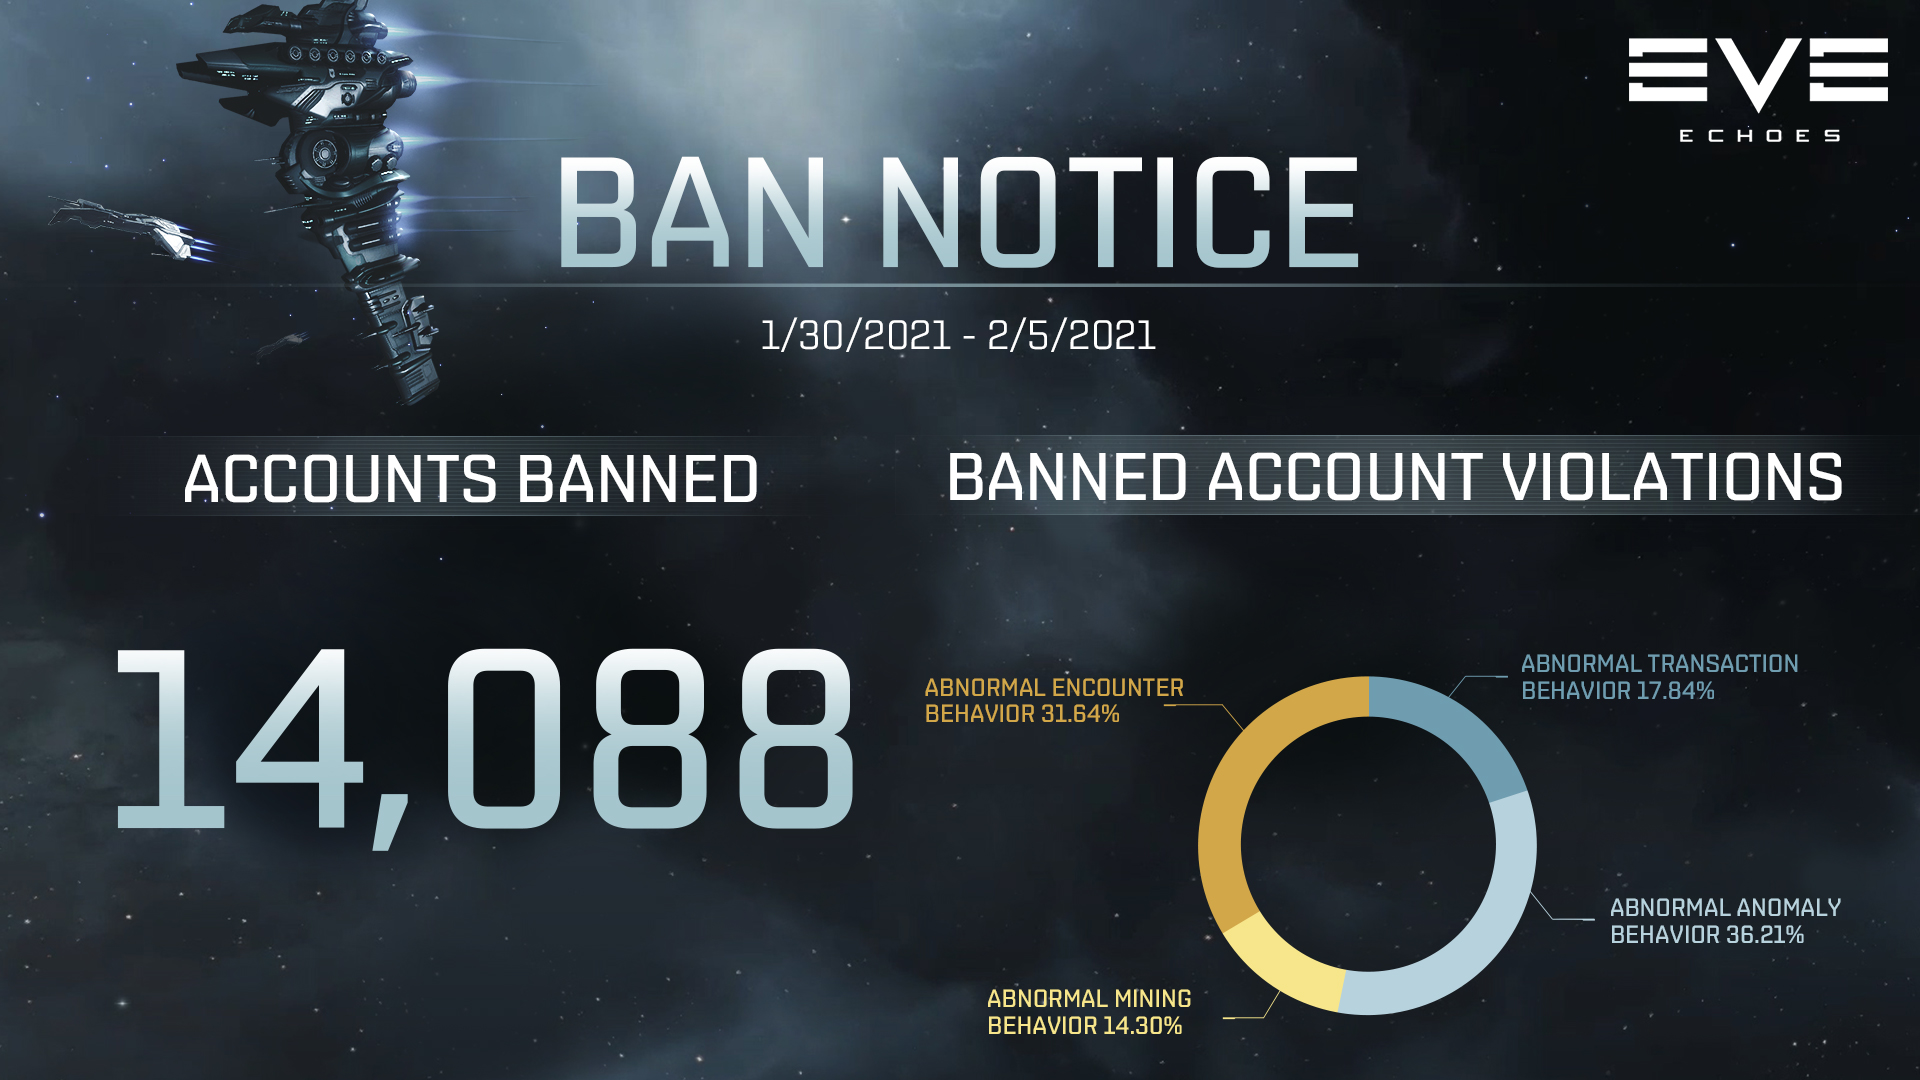 Ban Notice for 01/30-02/05